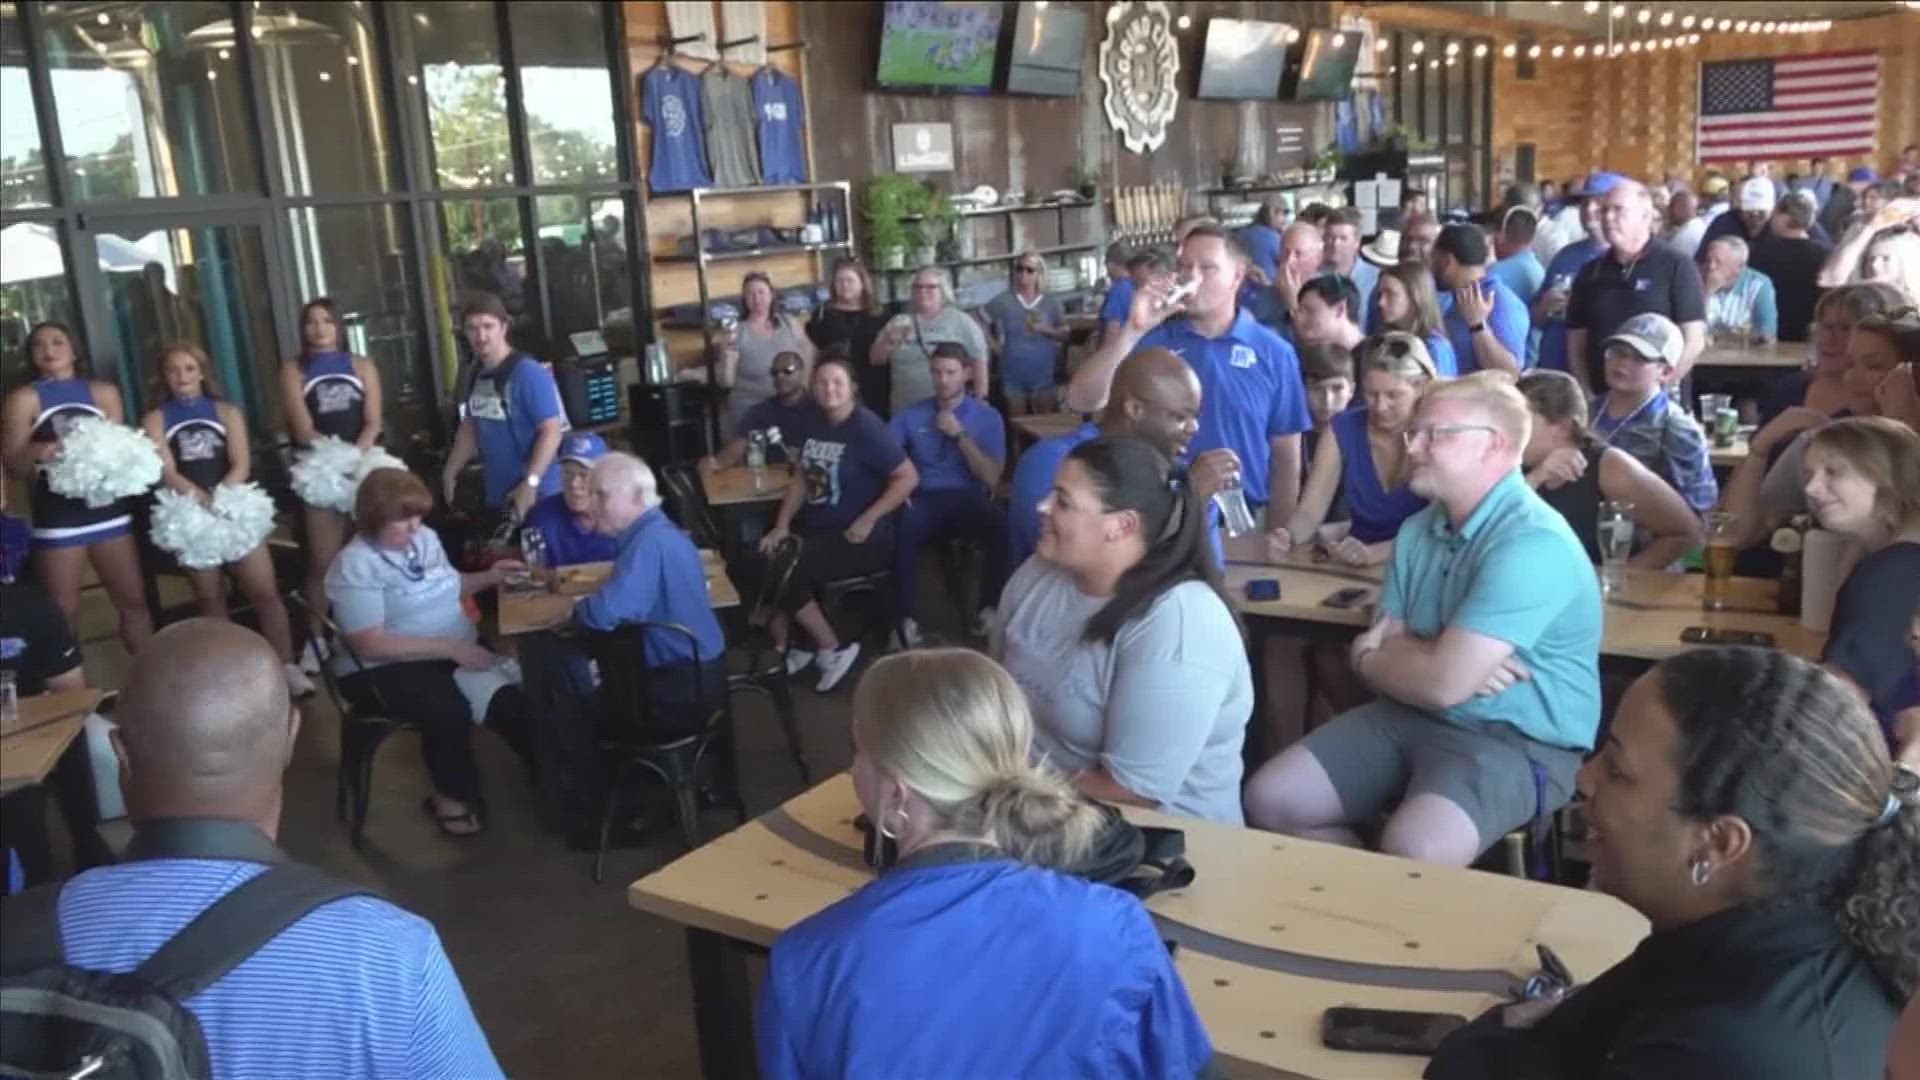 Multiple head coaches from the University of Memphis came down to Grind City Brewing to meet and celebrate with Tiger fans.